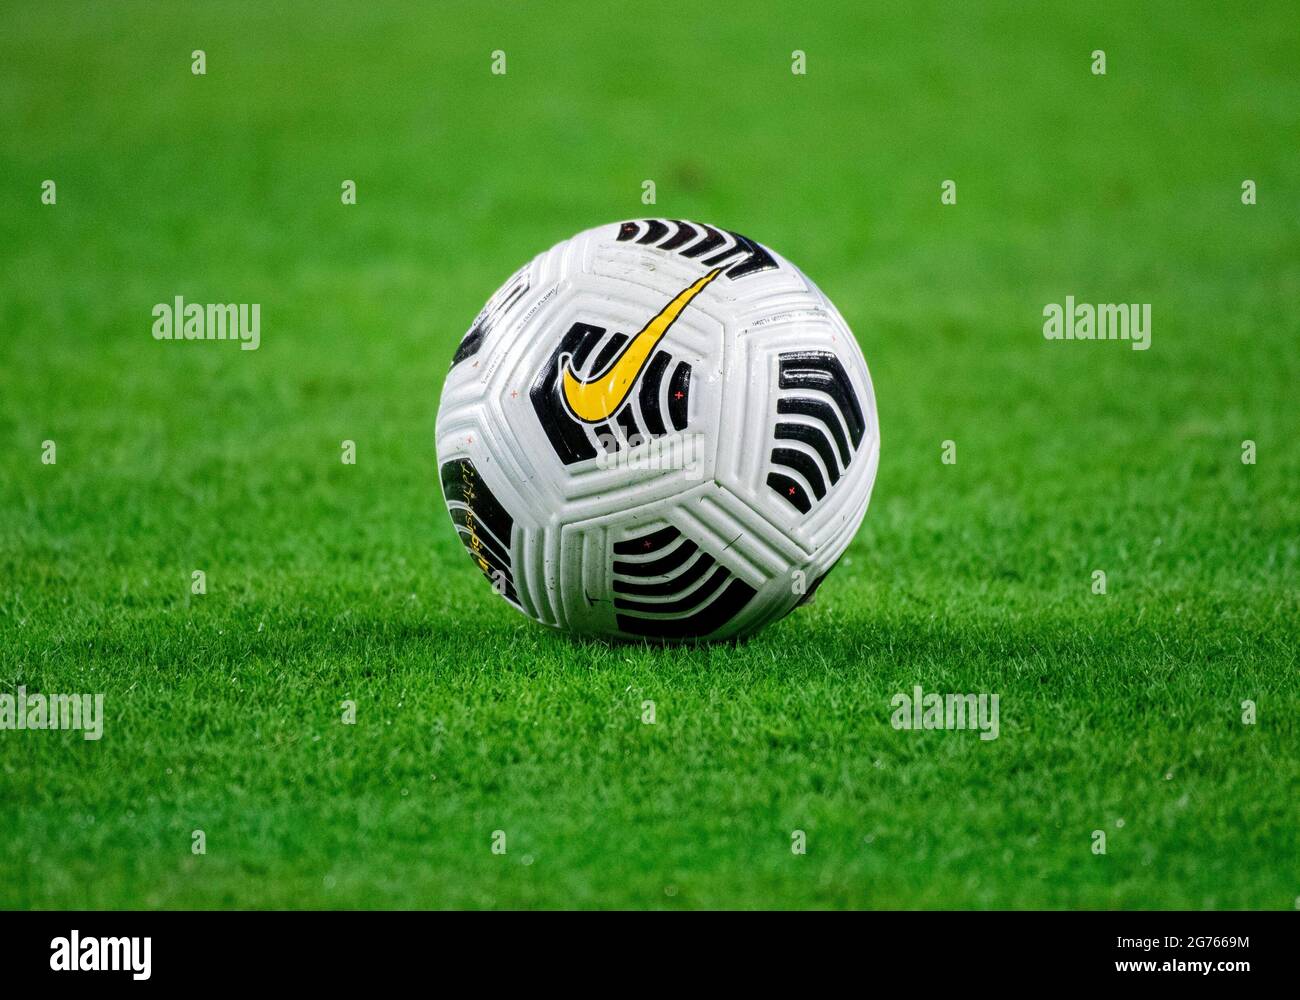 Jul 10, 2021: A Nike soccer ball sits on the field during a CONCACAF Gold  Cup game between Mexico and Trinidad & Tobago at AT&T Stadium in Arlington,  TX Mexico and Trinidad